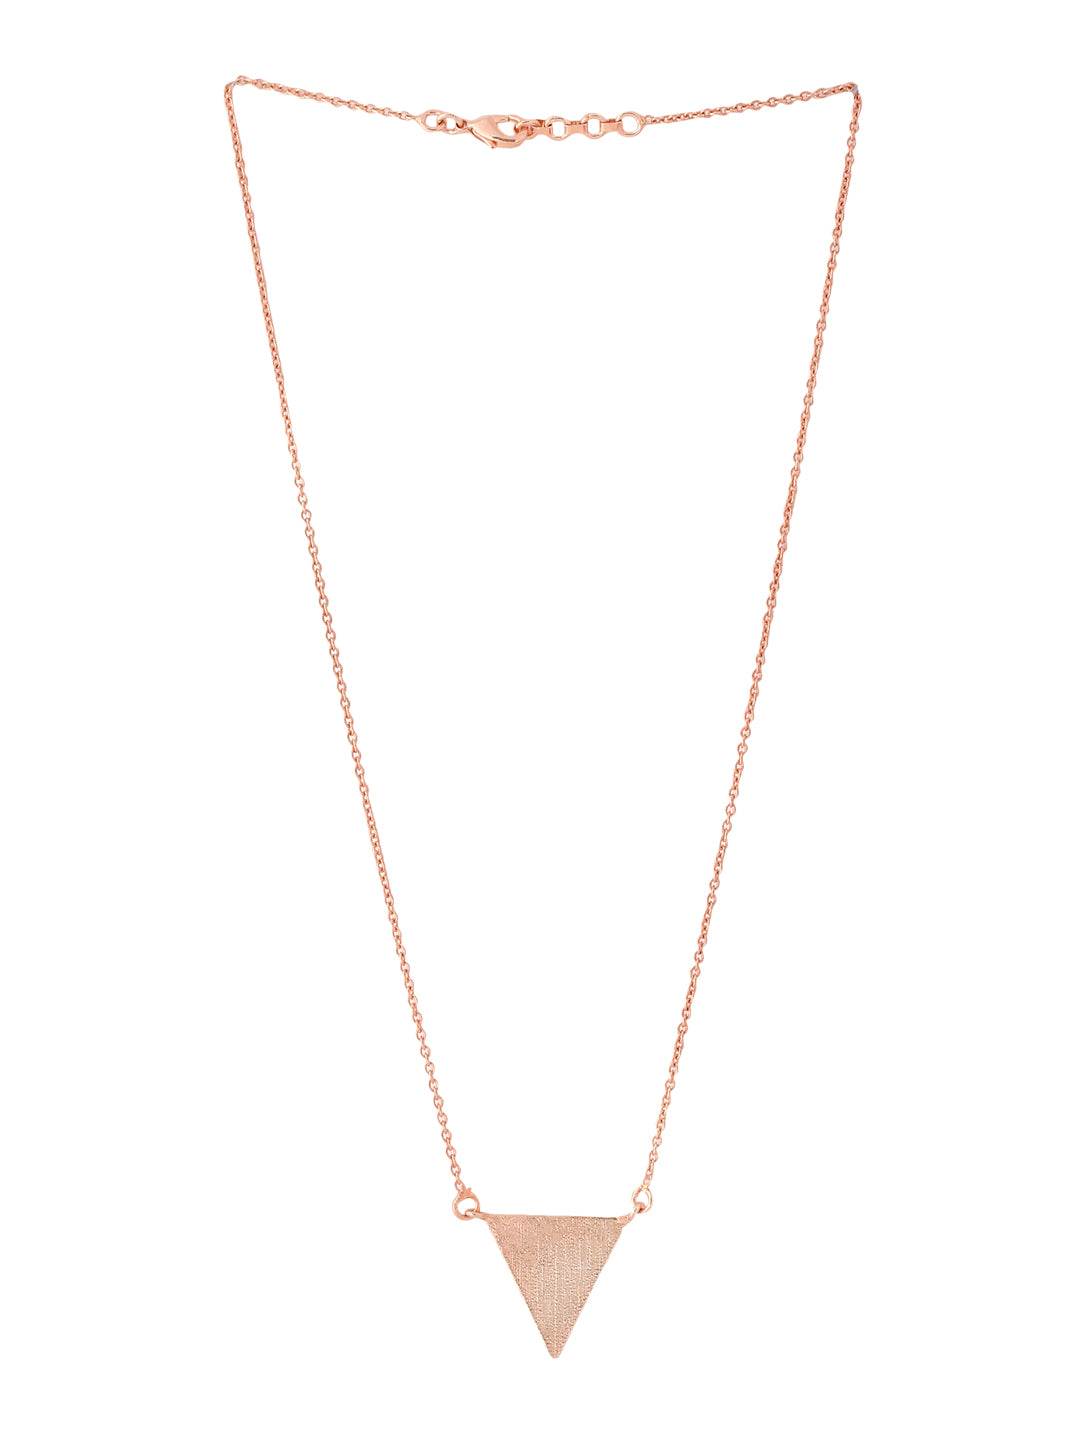 Gold Plated Triangle Shape Pendant Chain with Personalized Text for Men and  Women